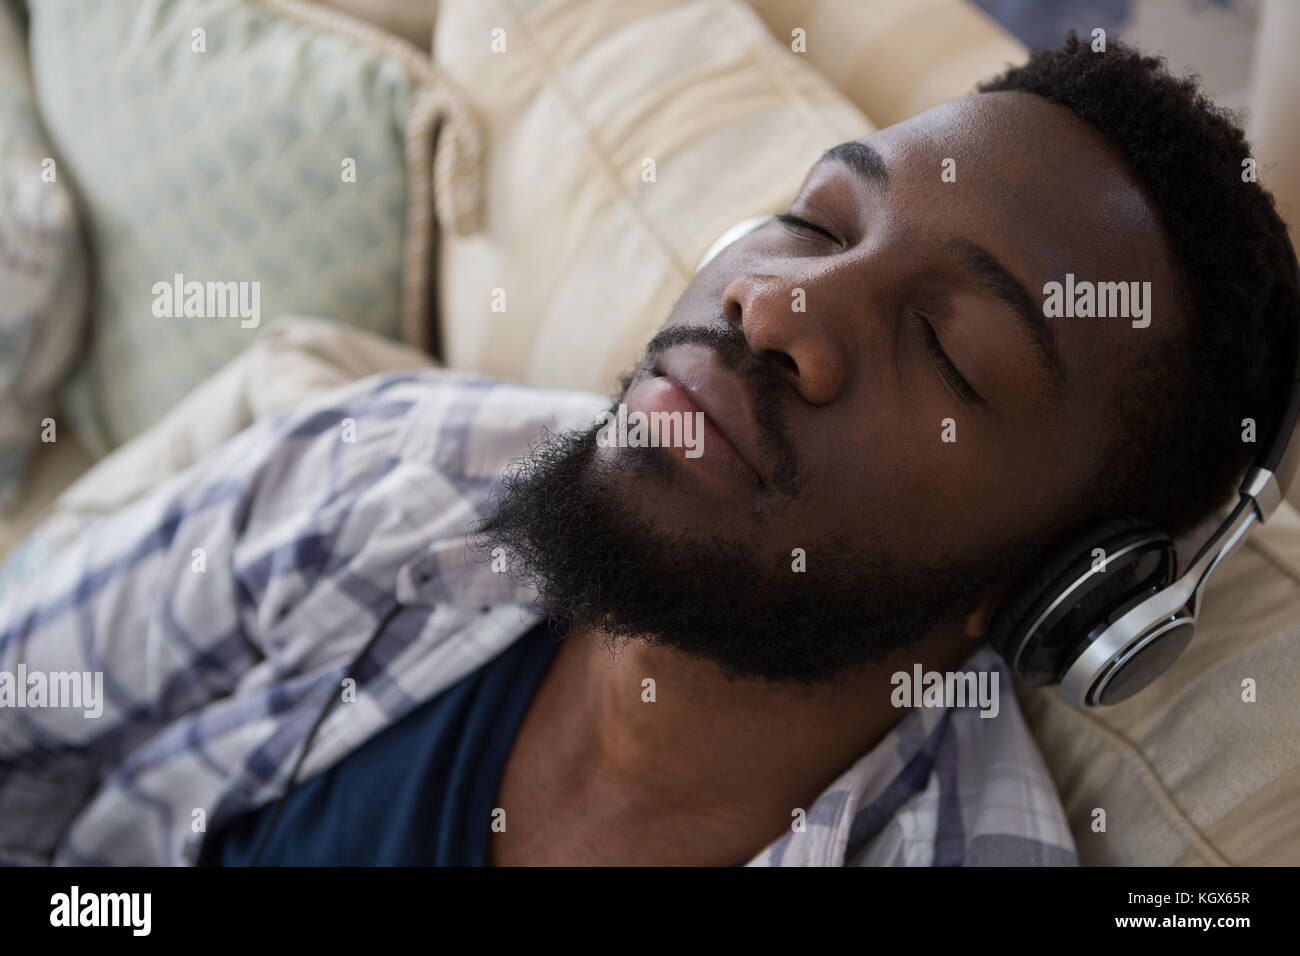 Man sleeping while listening to music at home Stock Photo